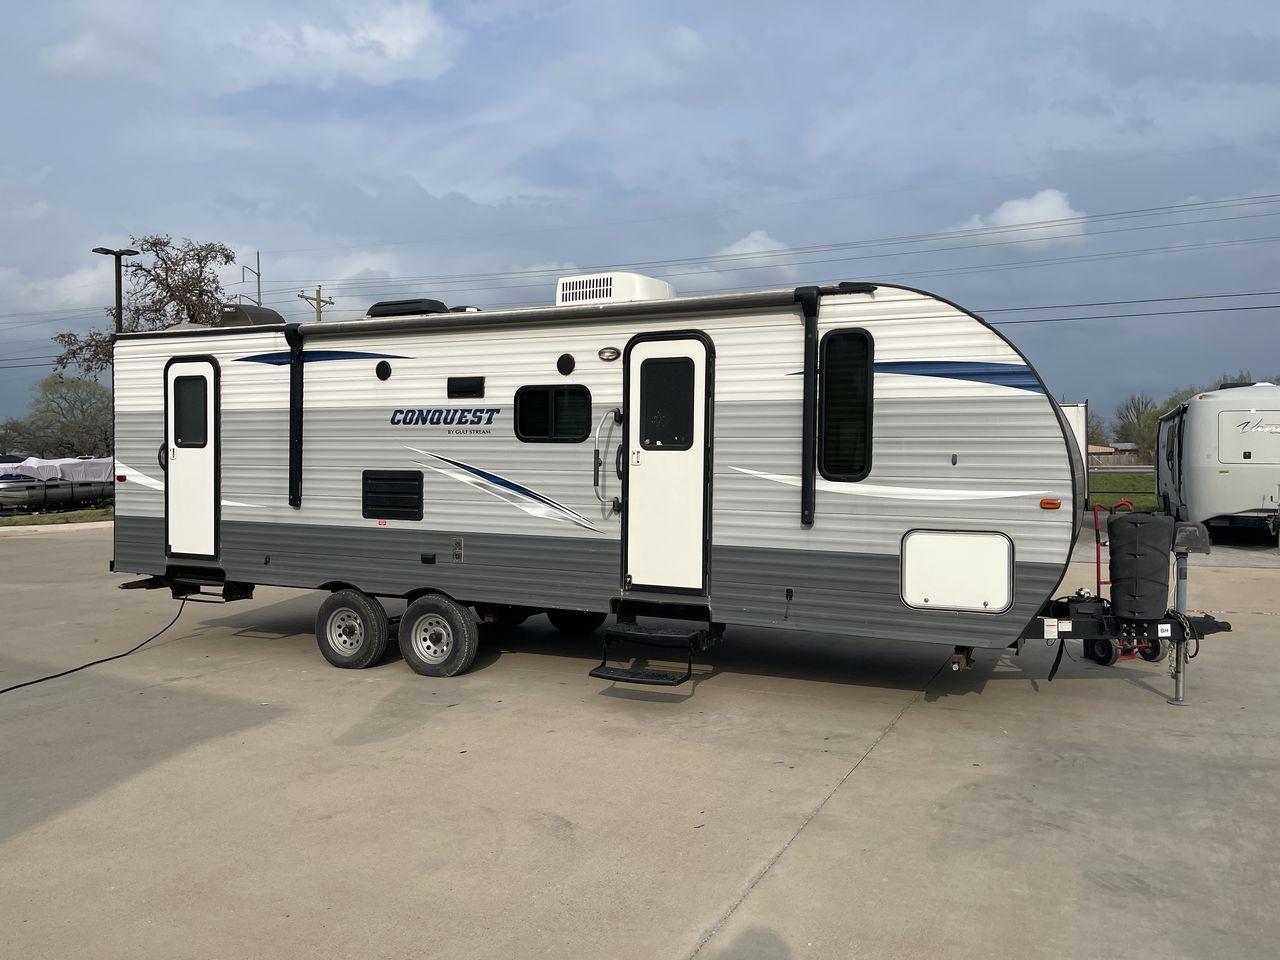 2019 WHITE GULF STREAM CONQUEST 268BH (1NL1G3026K1) , Length: 29.5 ft. | Dry Weight: 5,220 lbs. | Slides: 1 transmission, located at 4319 N Main St, Cleburne, TX, 76033, (817) 678-5133, 32.385960, -97.391212 - Lavish in a cozy trailer when you are out for a camping trip with the whole family in this 2019 Gulf Stream Conquest 268BH Travel Trailer. The measurements of this trailer are 29.6 ft in length, 8 ft in width, 11.1 ft in height, and 6.8 ft in interior height. It has a dry weight of 5,177 lbs with a - Photo #21